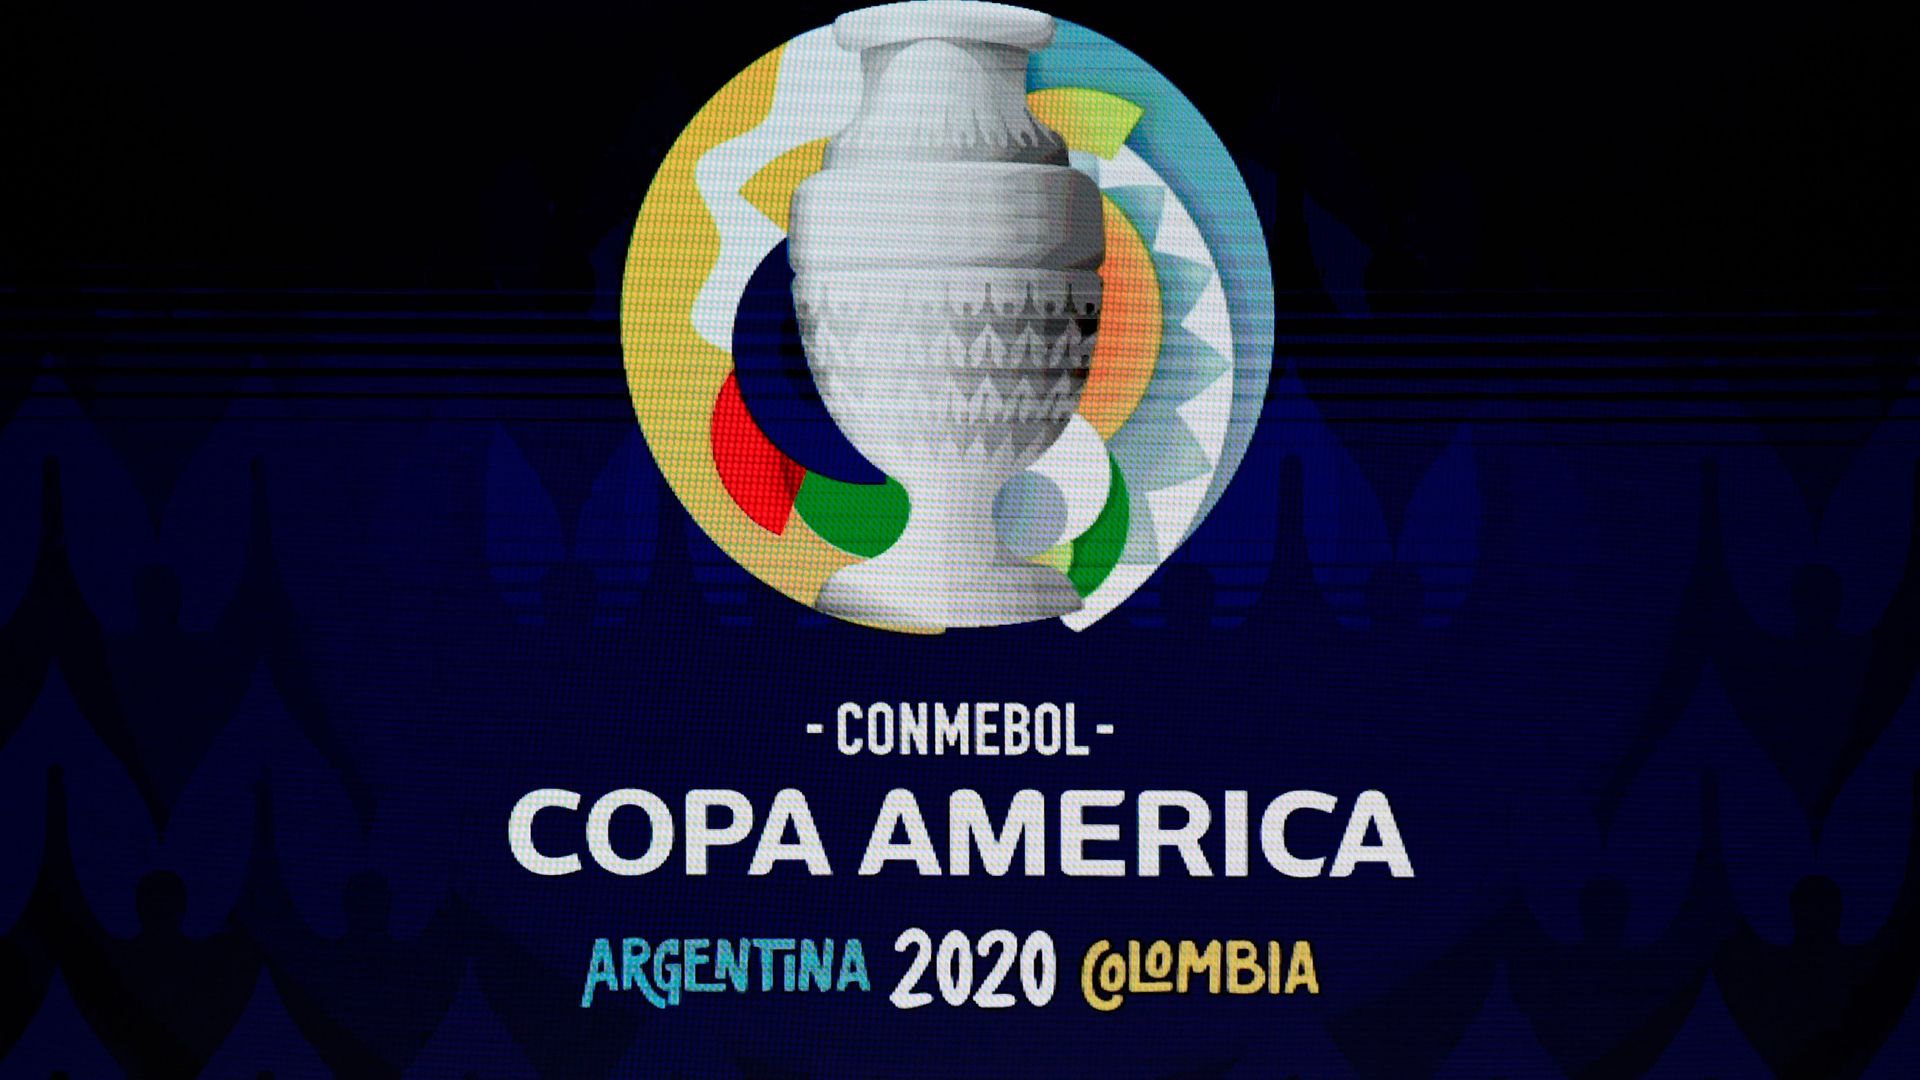 A screen displays the logo of the Copa America 2020 during the draw of the football tournament at the Convention Centre in Cartagena, Colombia, on December 3, 2019.